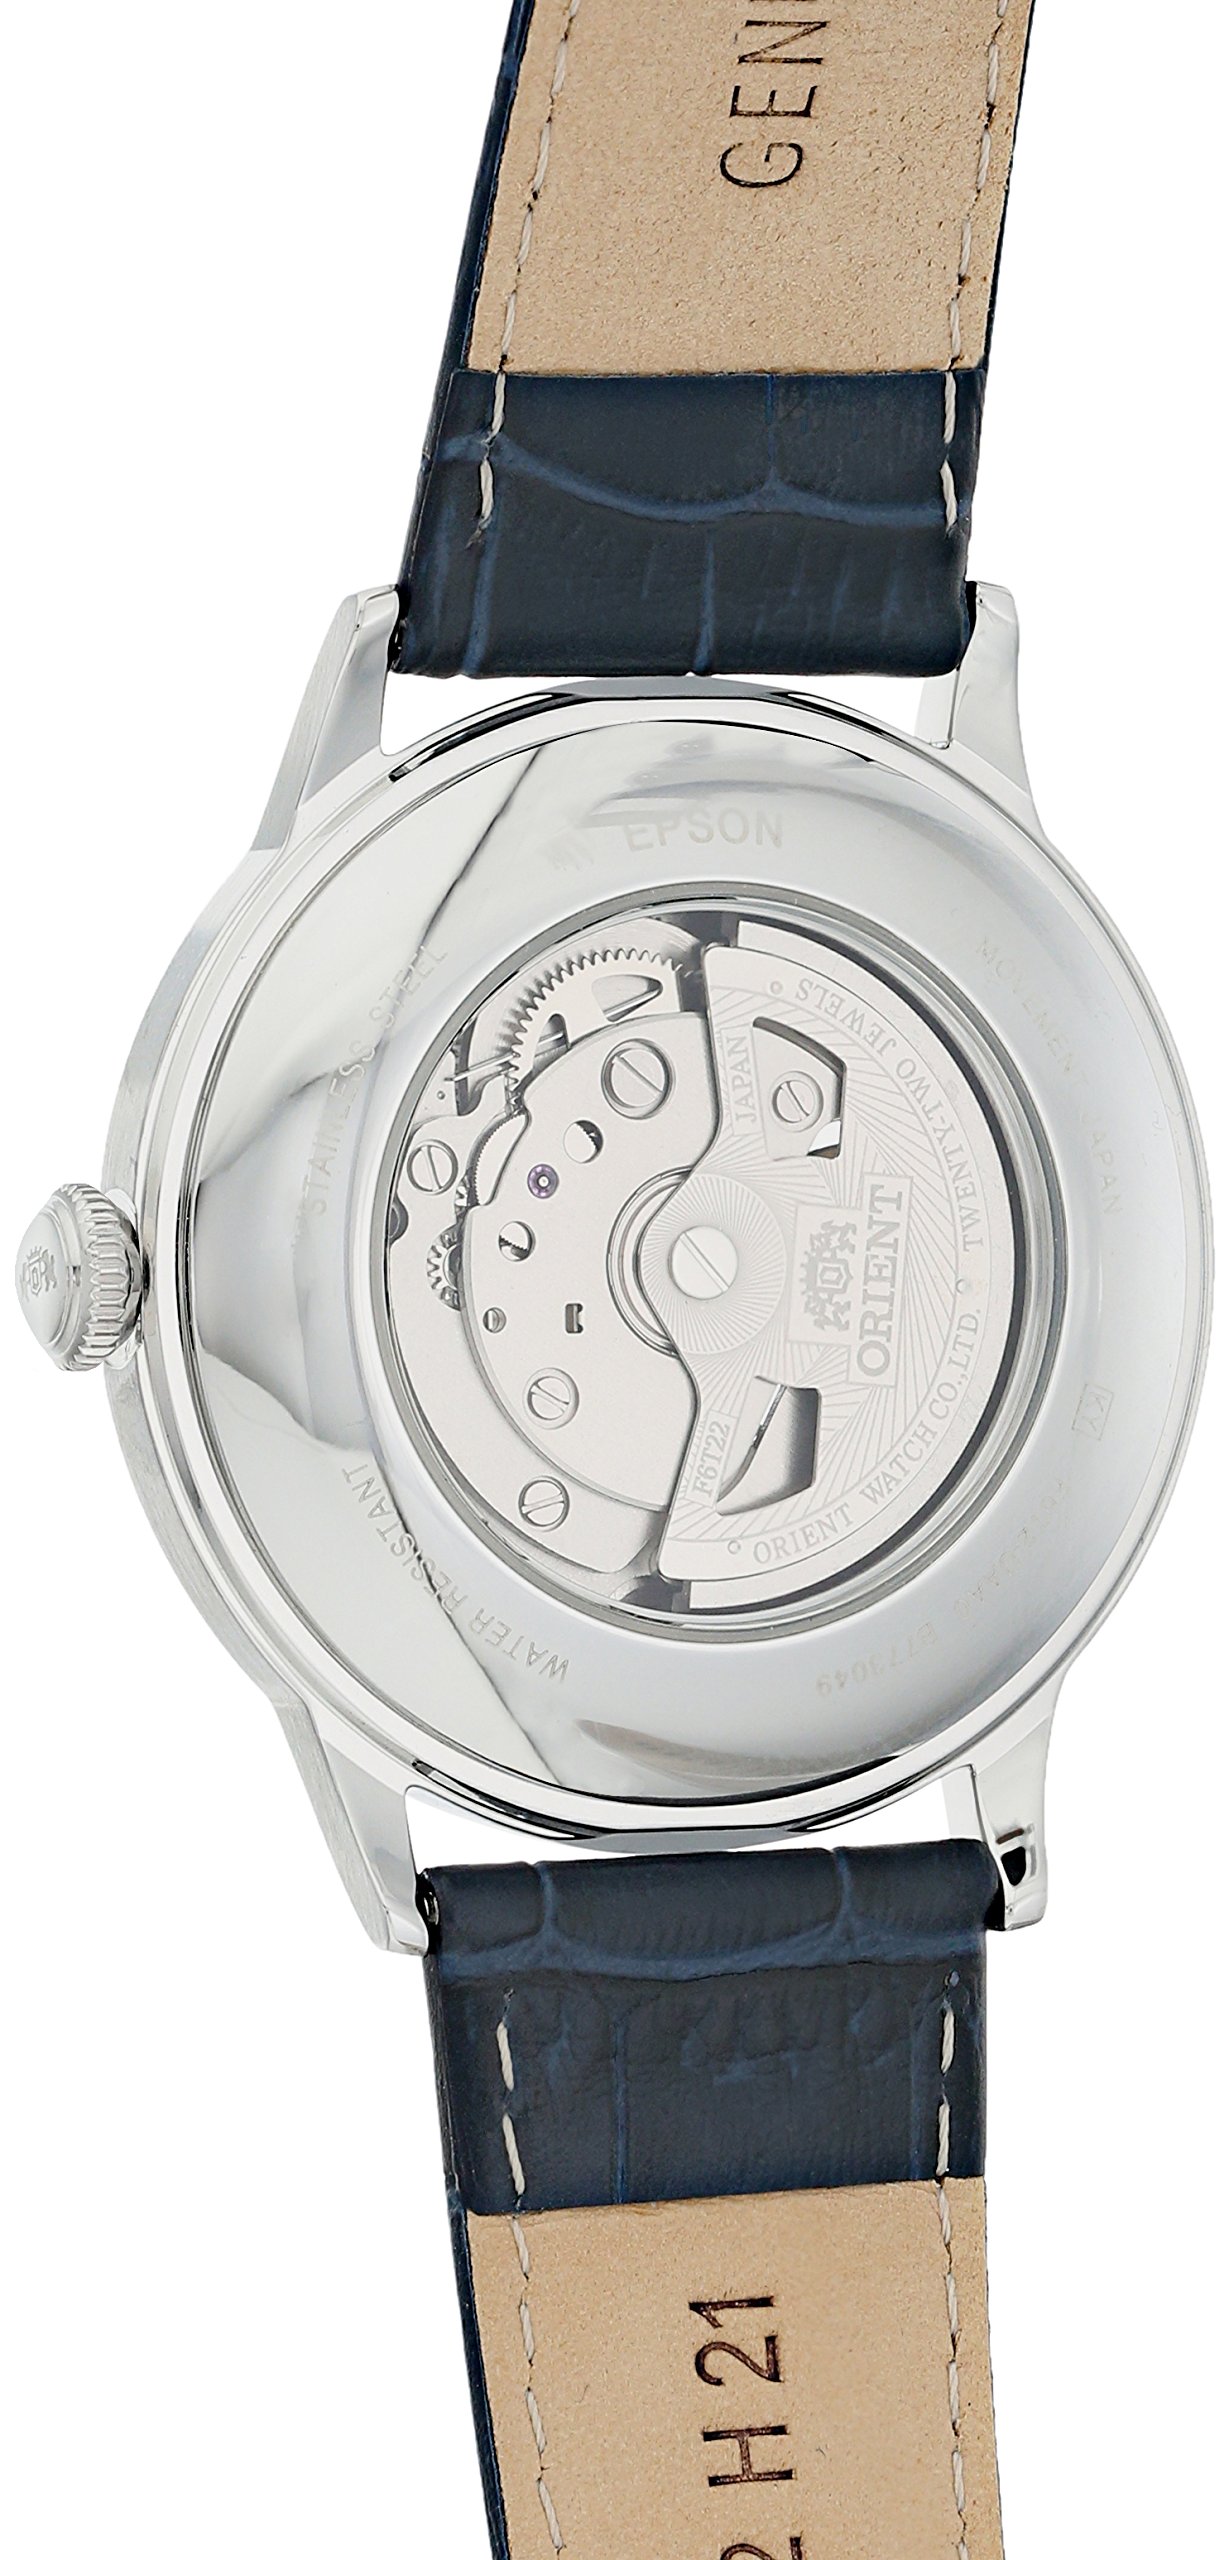 Orient 'Bambino Open Heart' Japanese Automatic Stainless Steel and Leather Dress Watch